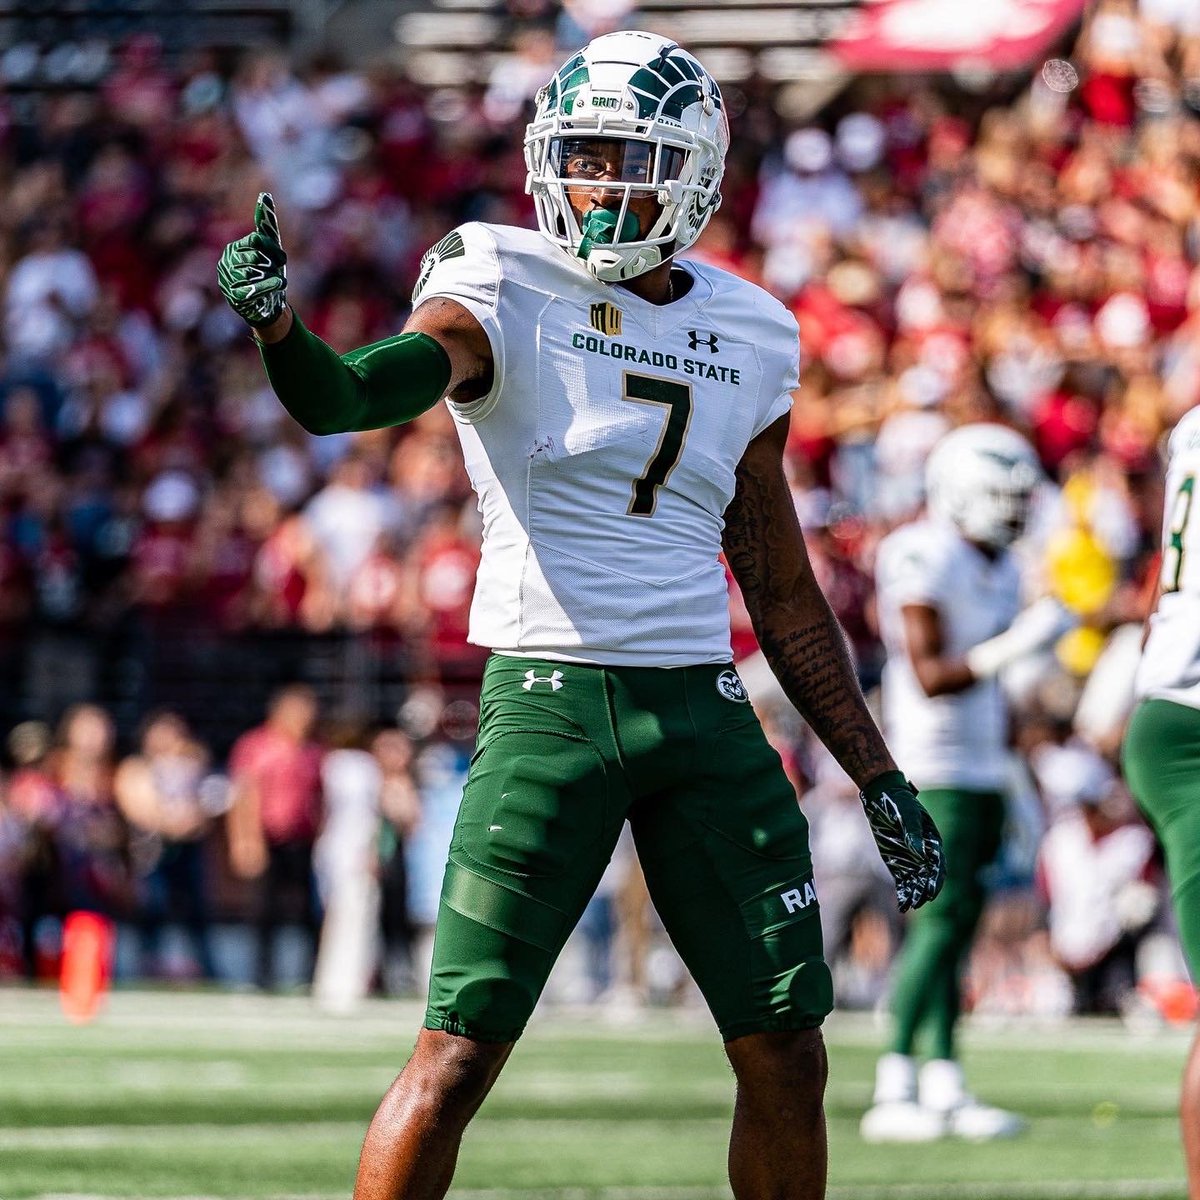 UDFA CB Chigozie Anusiem (Colorado St) Anusiem’s lack of on-ball production is concerning, but he plays with an edge and has the height/weight/speed blend that is coveted by NFL teams. He projects as a rotational press-man corner with zone experience. -@dpbrugler (Tier 1🥇)…